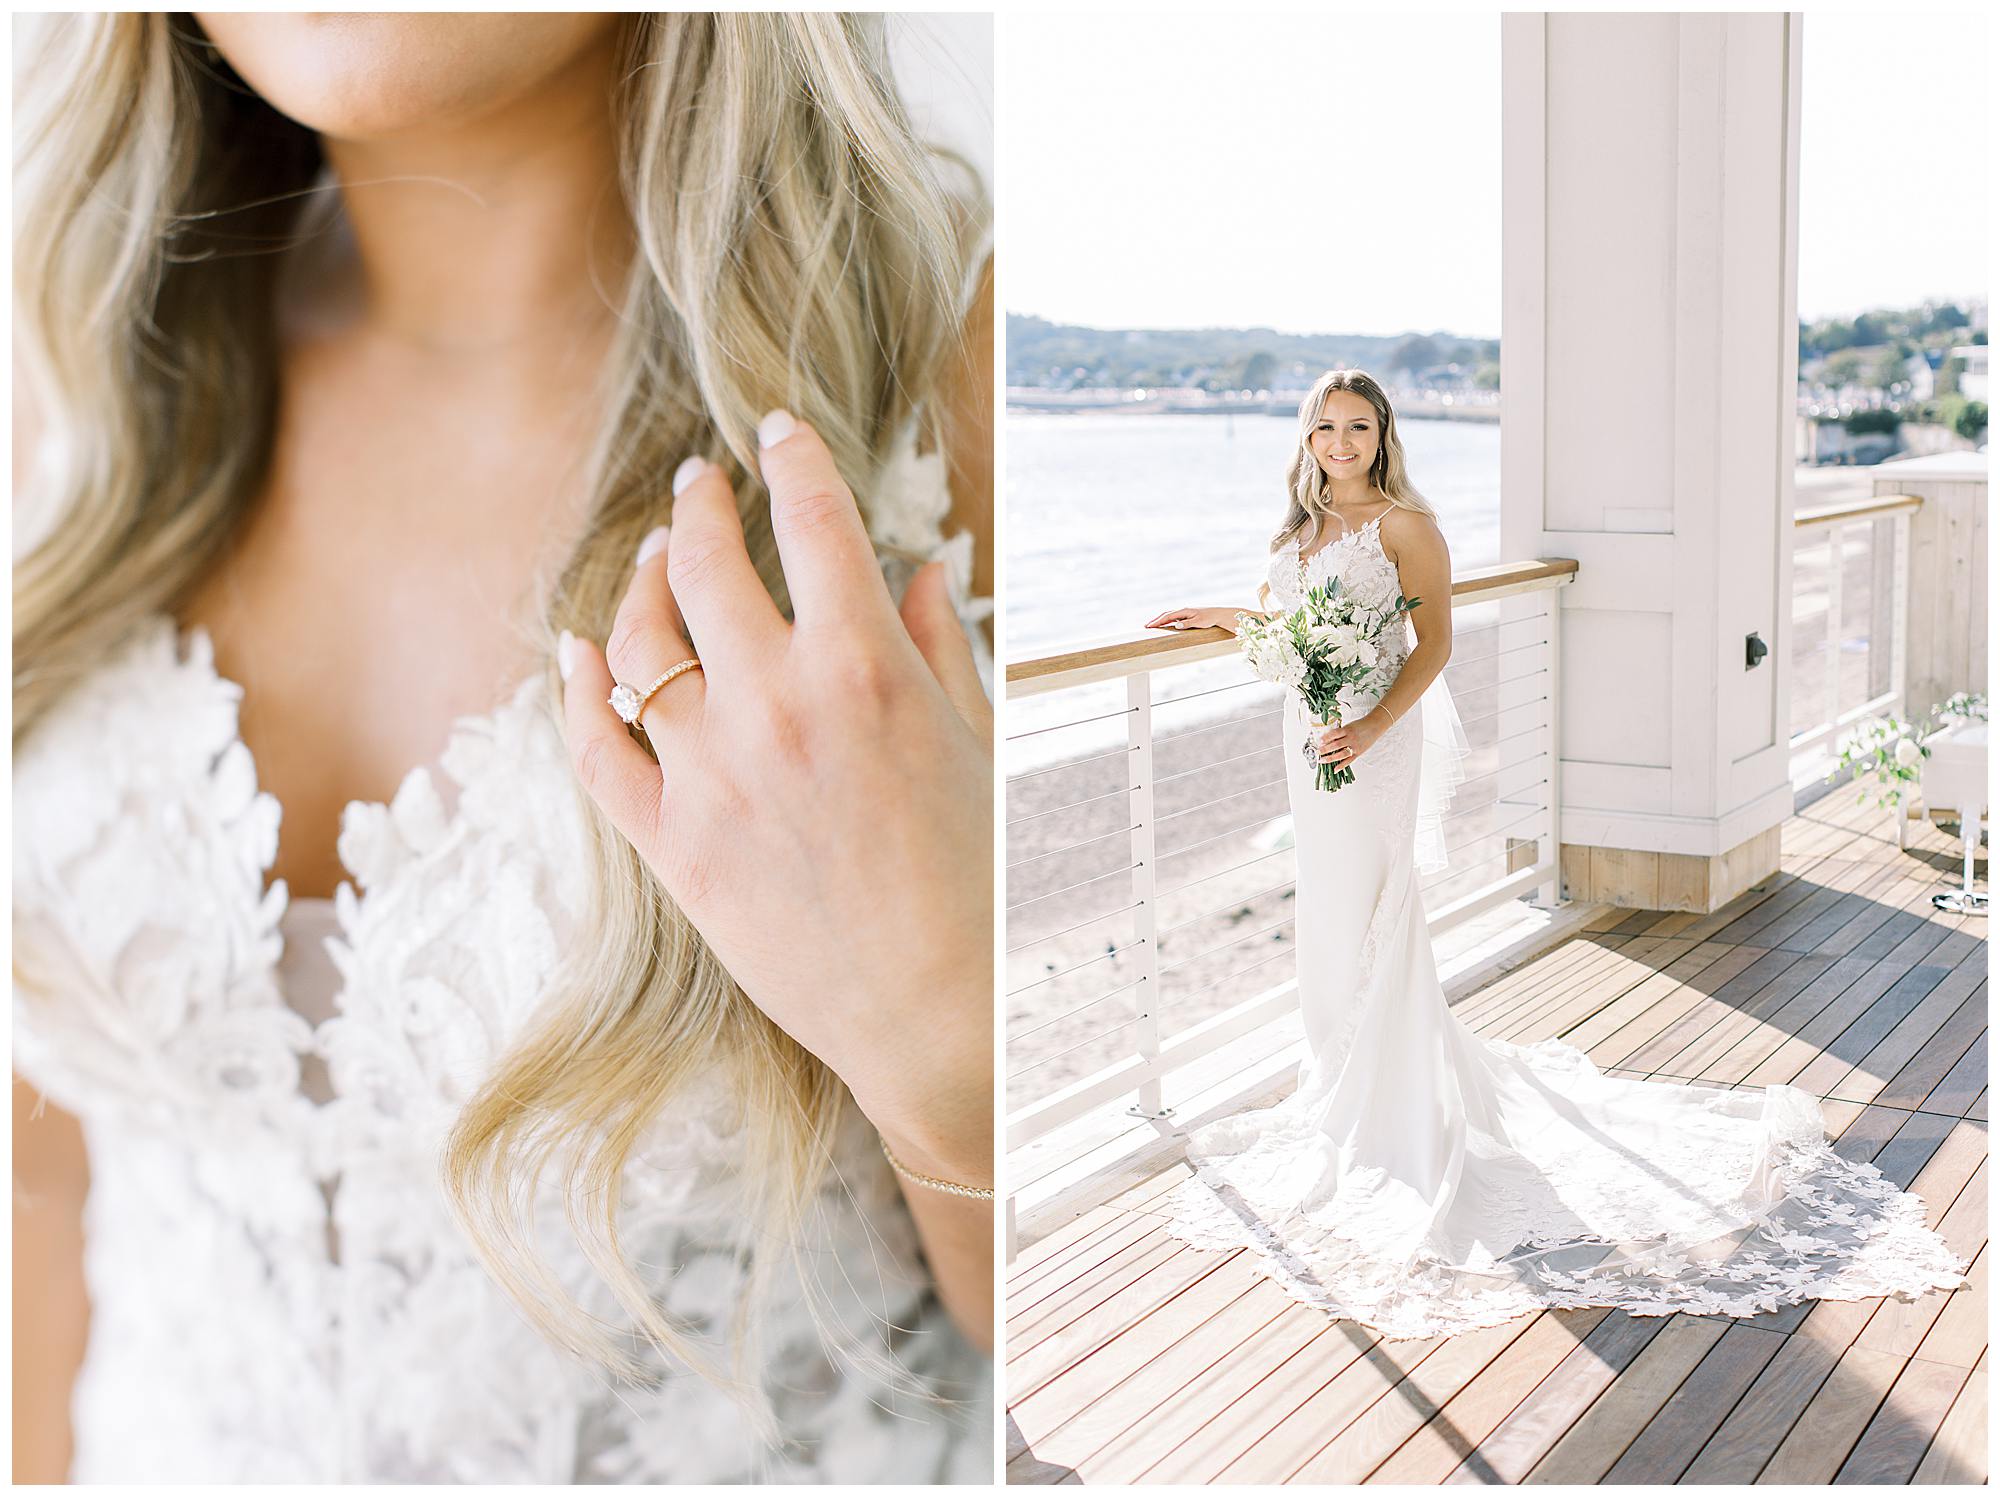 A Sophisticated Summer Wedding at the Beauport Hotel